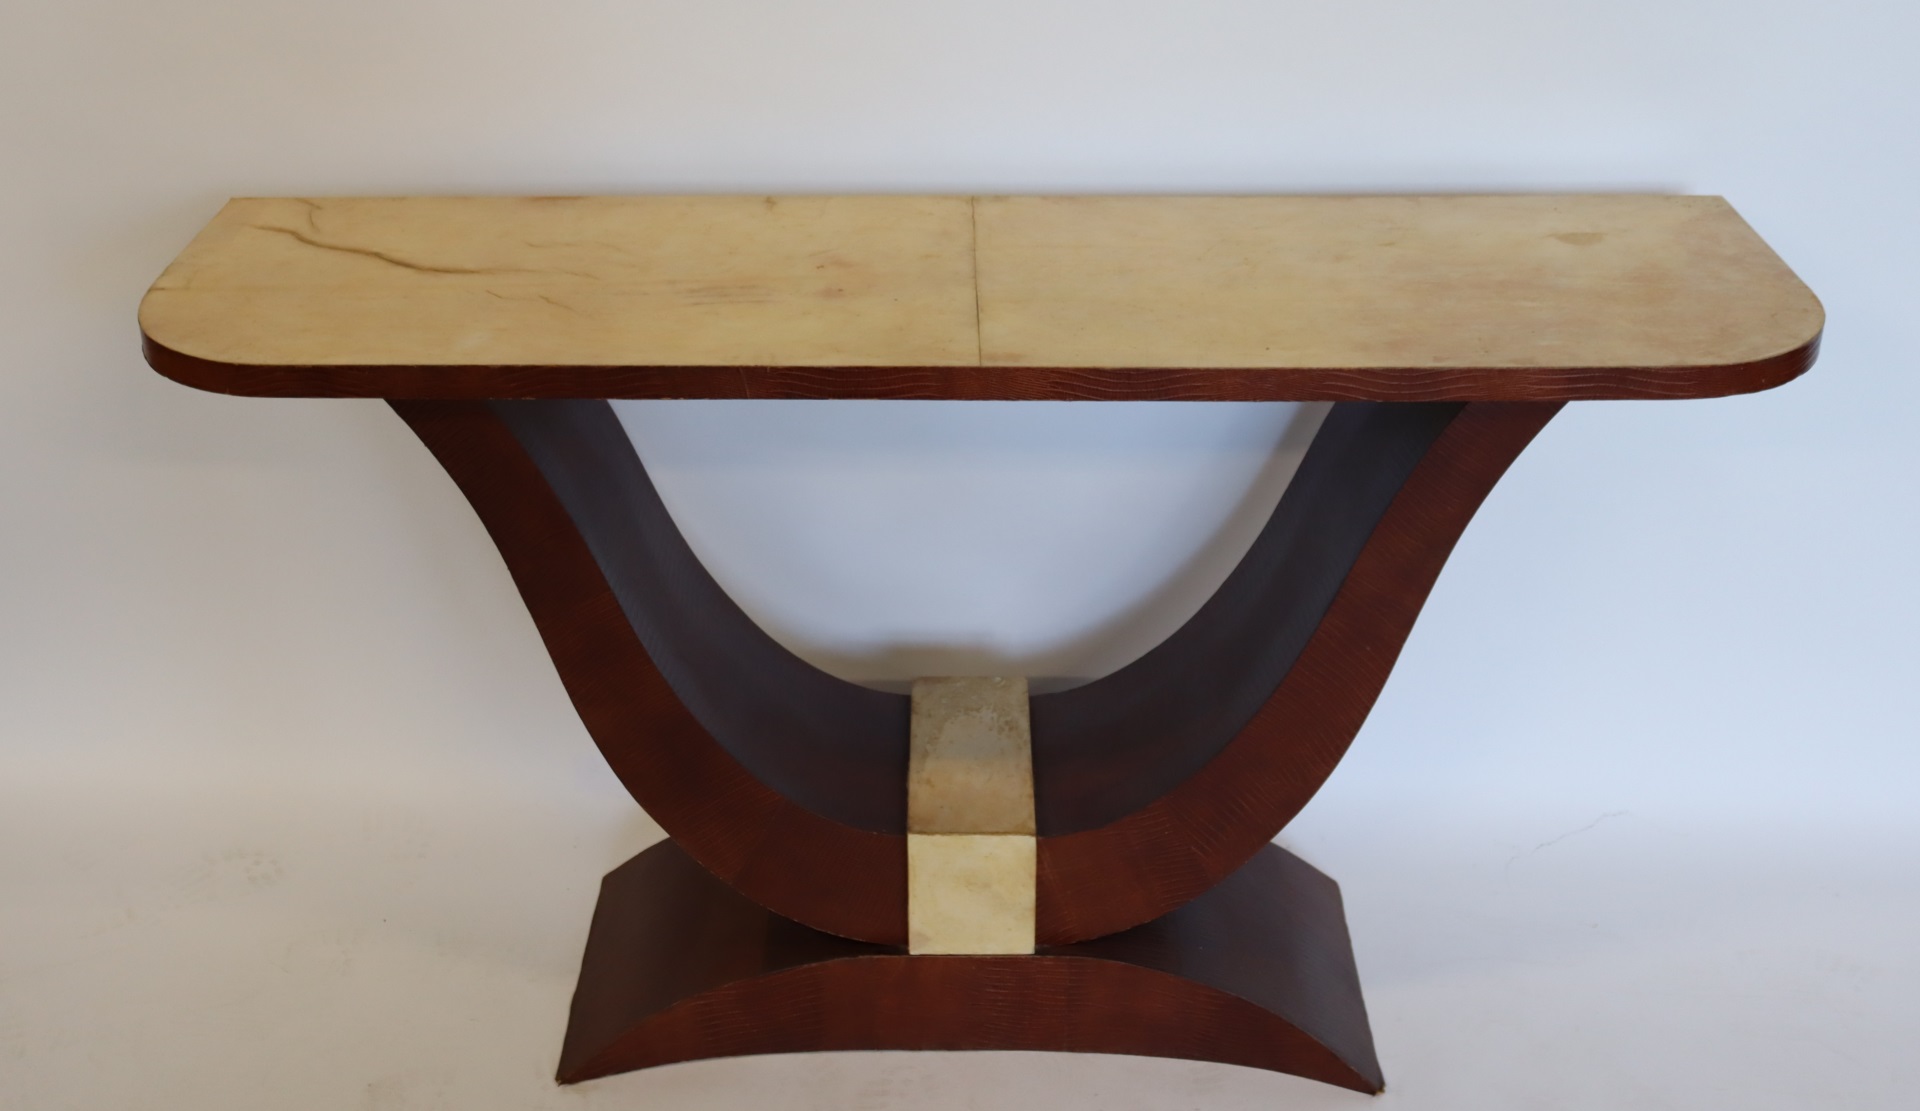 ART DECO CONSOLE TABLE. From an